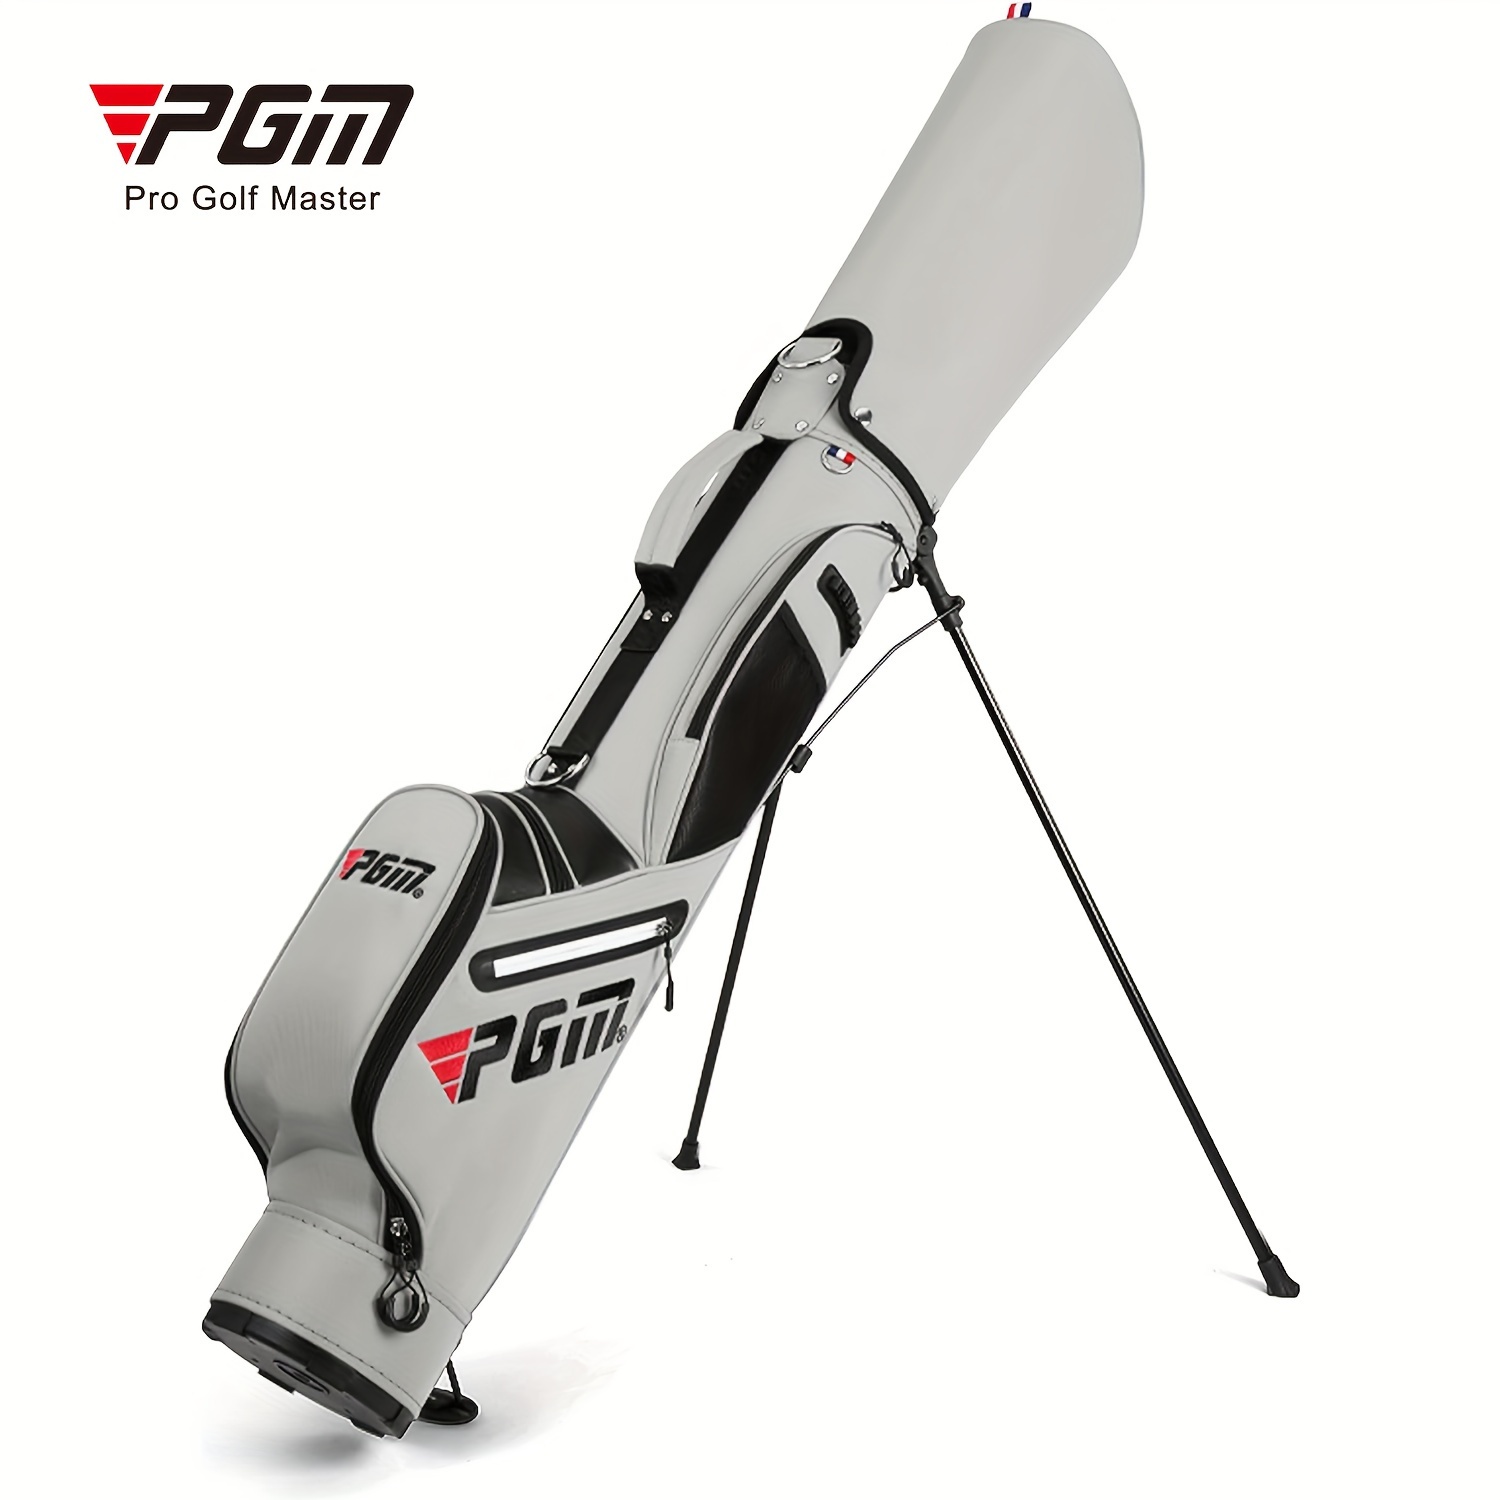 

Pgm Golf Stand Bag - Water-repellent, Easy To Carry, Durable, And Organized Golf Bag With 6 Ball-tee Slots And Pocket For Extra Storage, Portable Travel Bag With Padded Strap